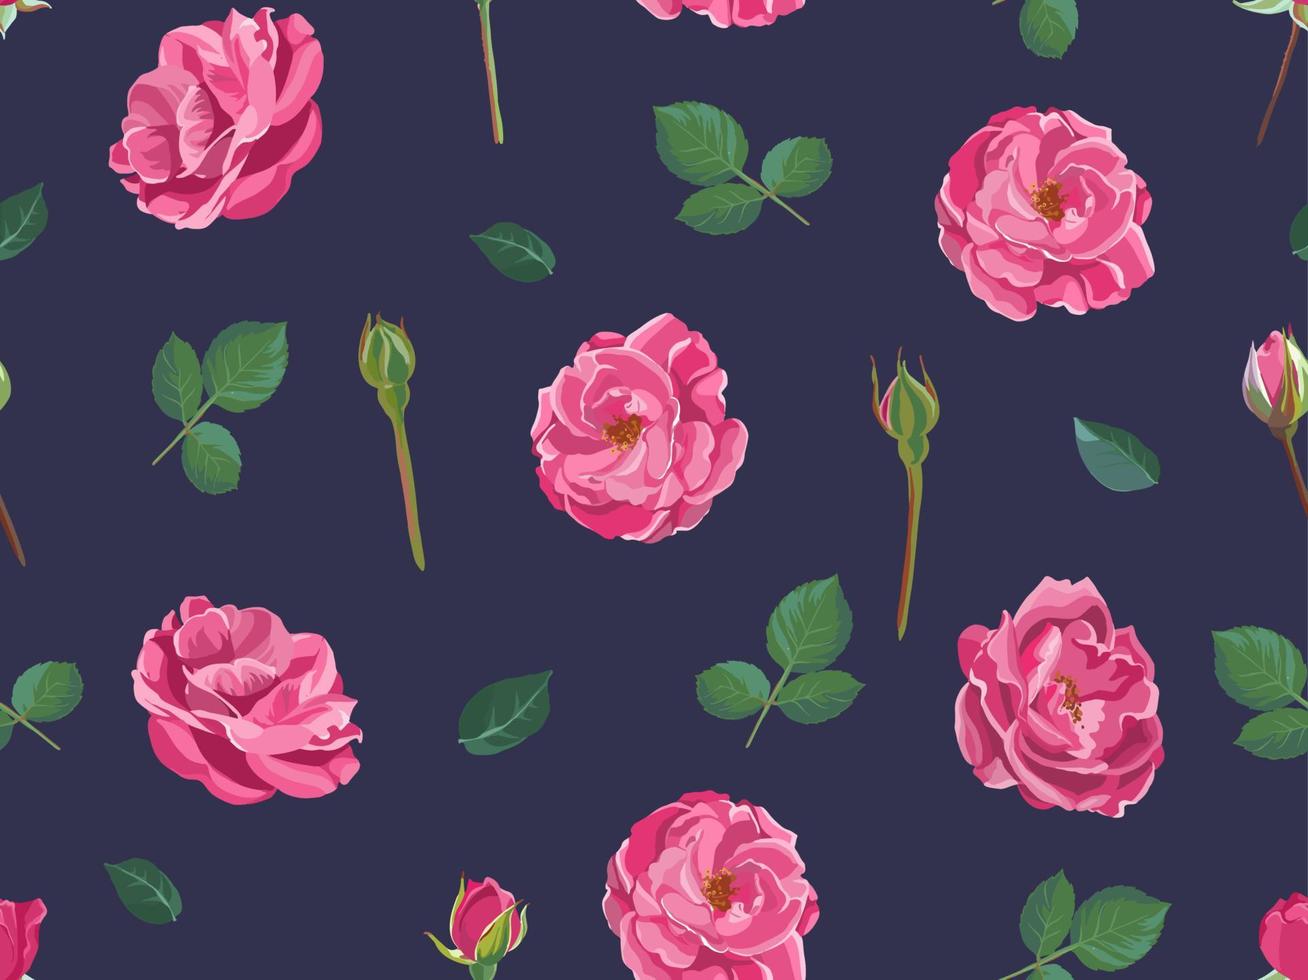 Rose print with blooming flowers and buds pattern vector